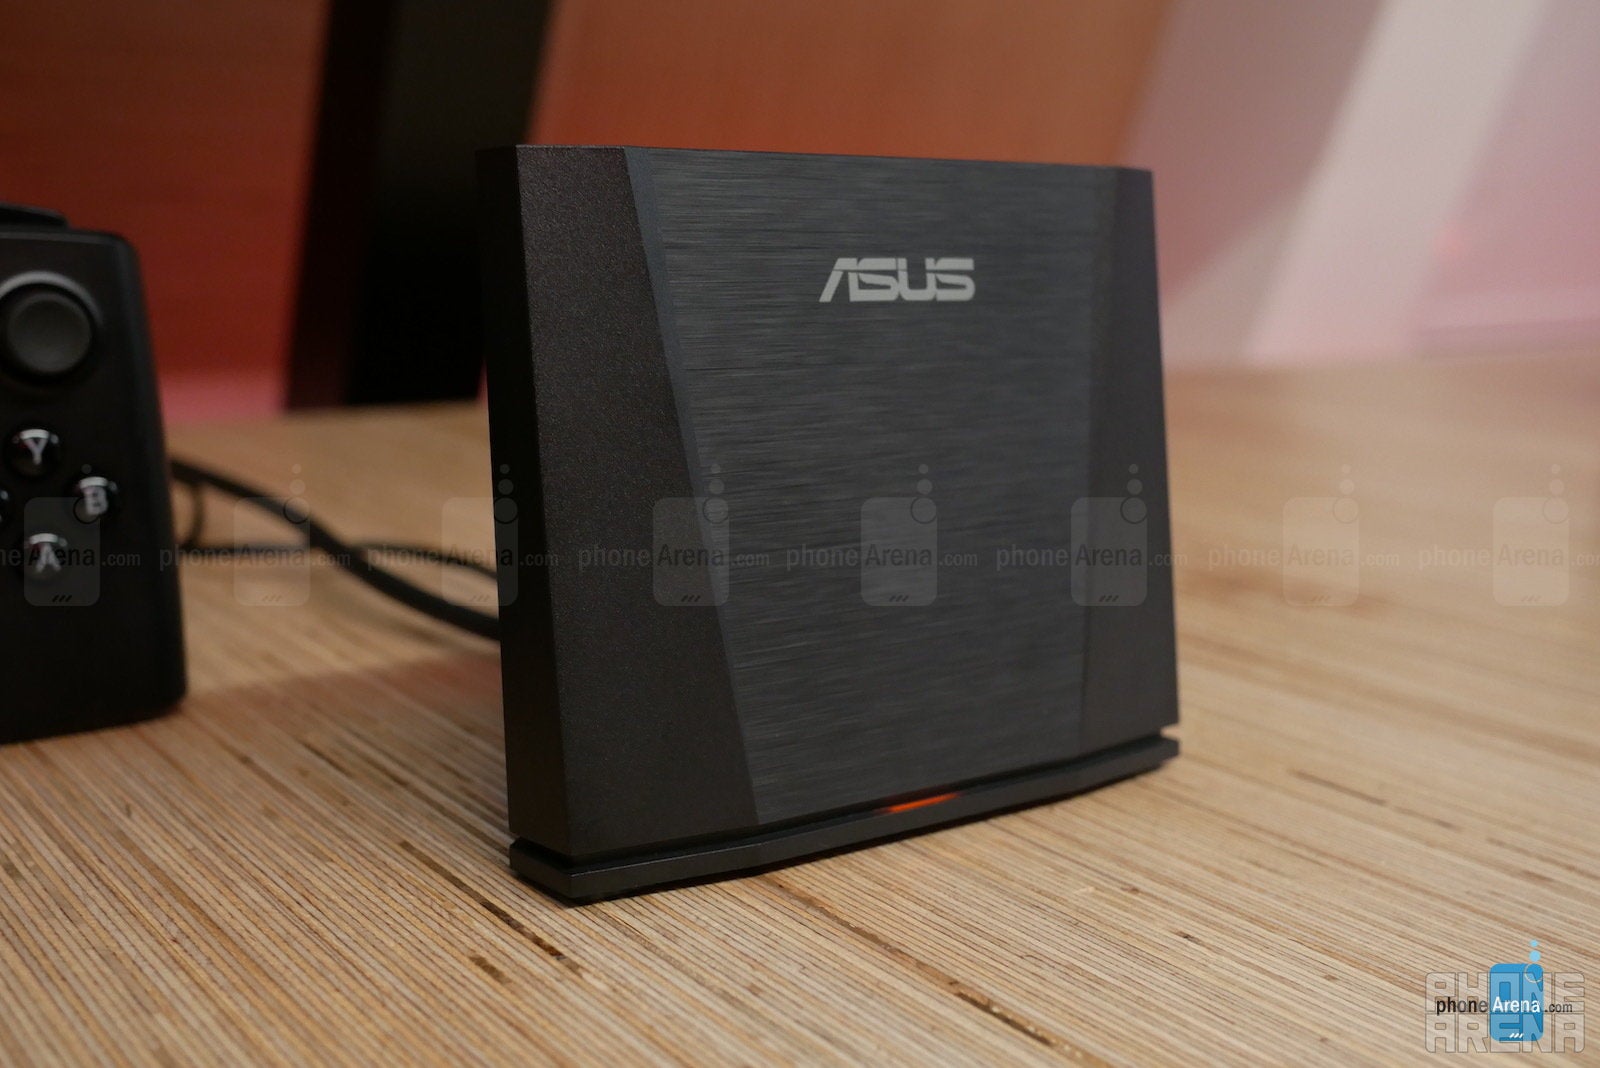 Asus ROG Phone and Accessories Hands-On: More Hardware, More Gaming